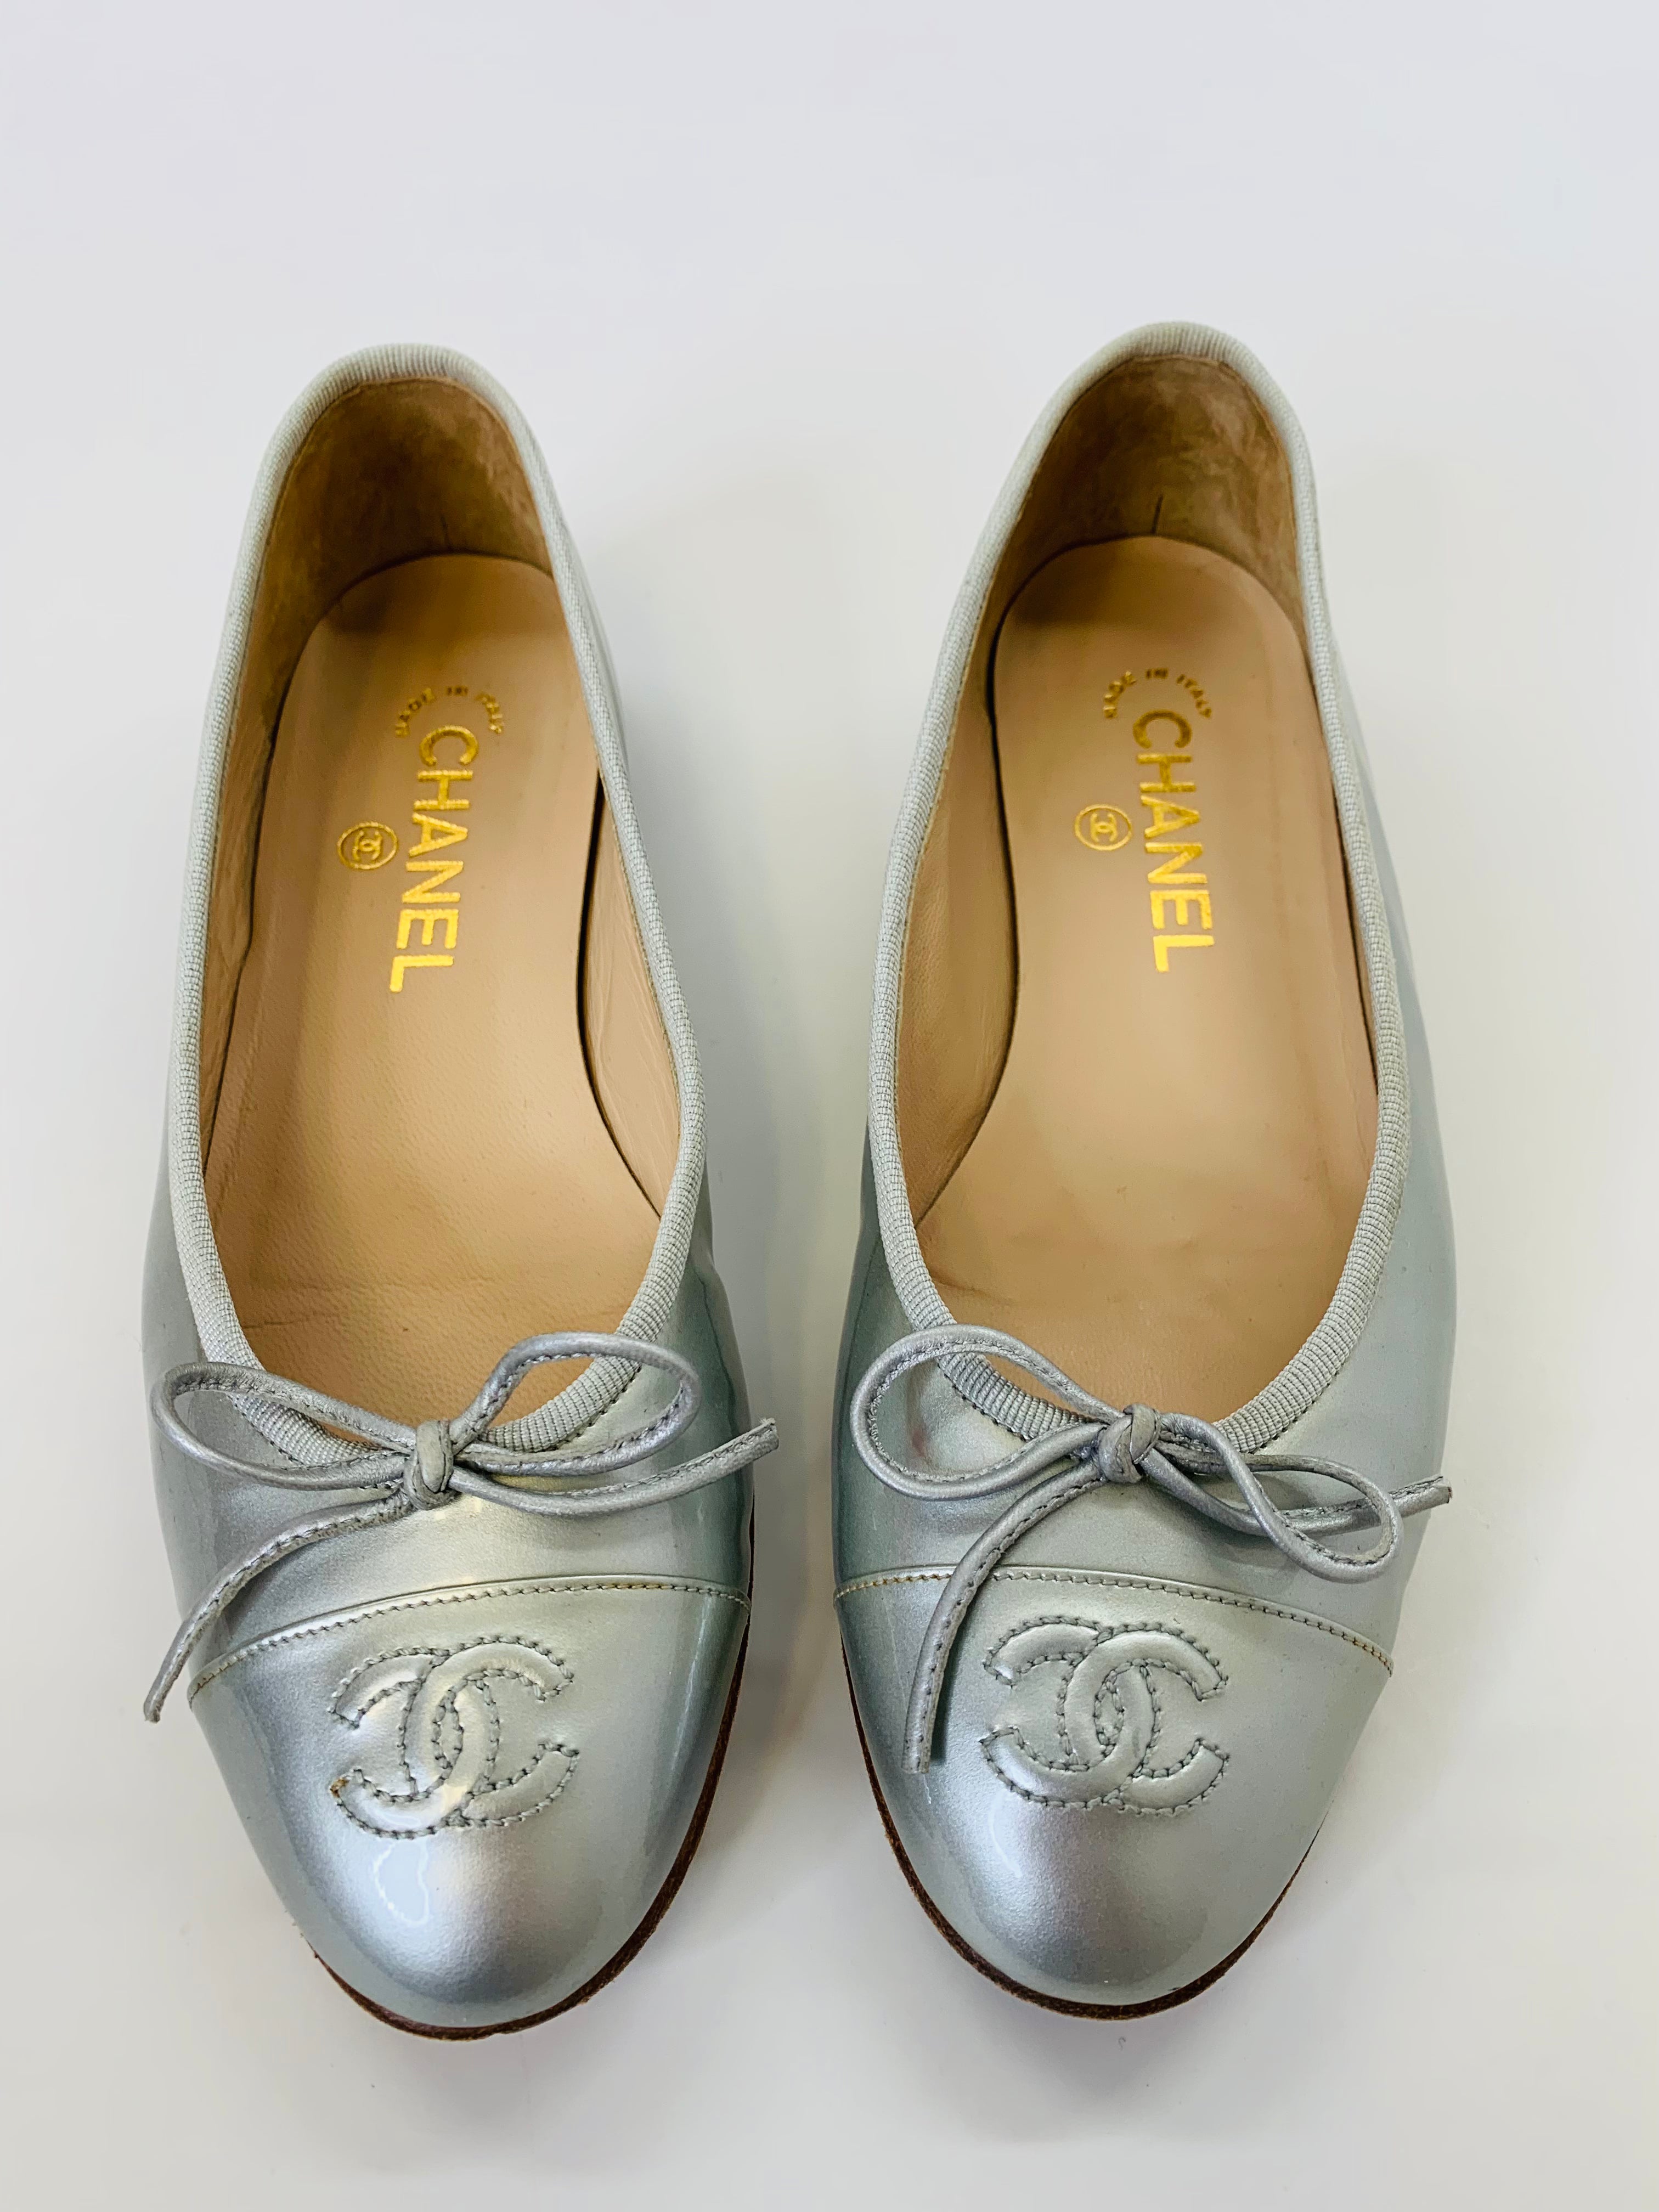 Patent leather ballet flats Chanel Black size 37.5 EU in Patent